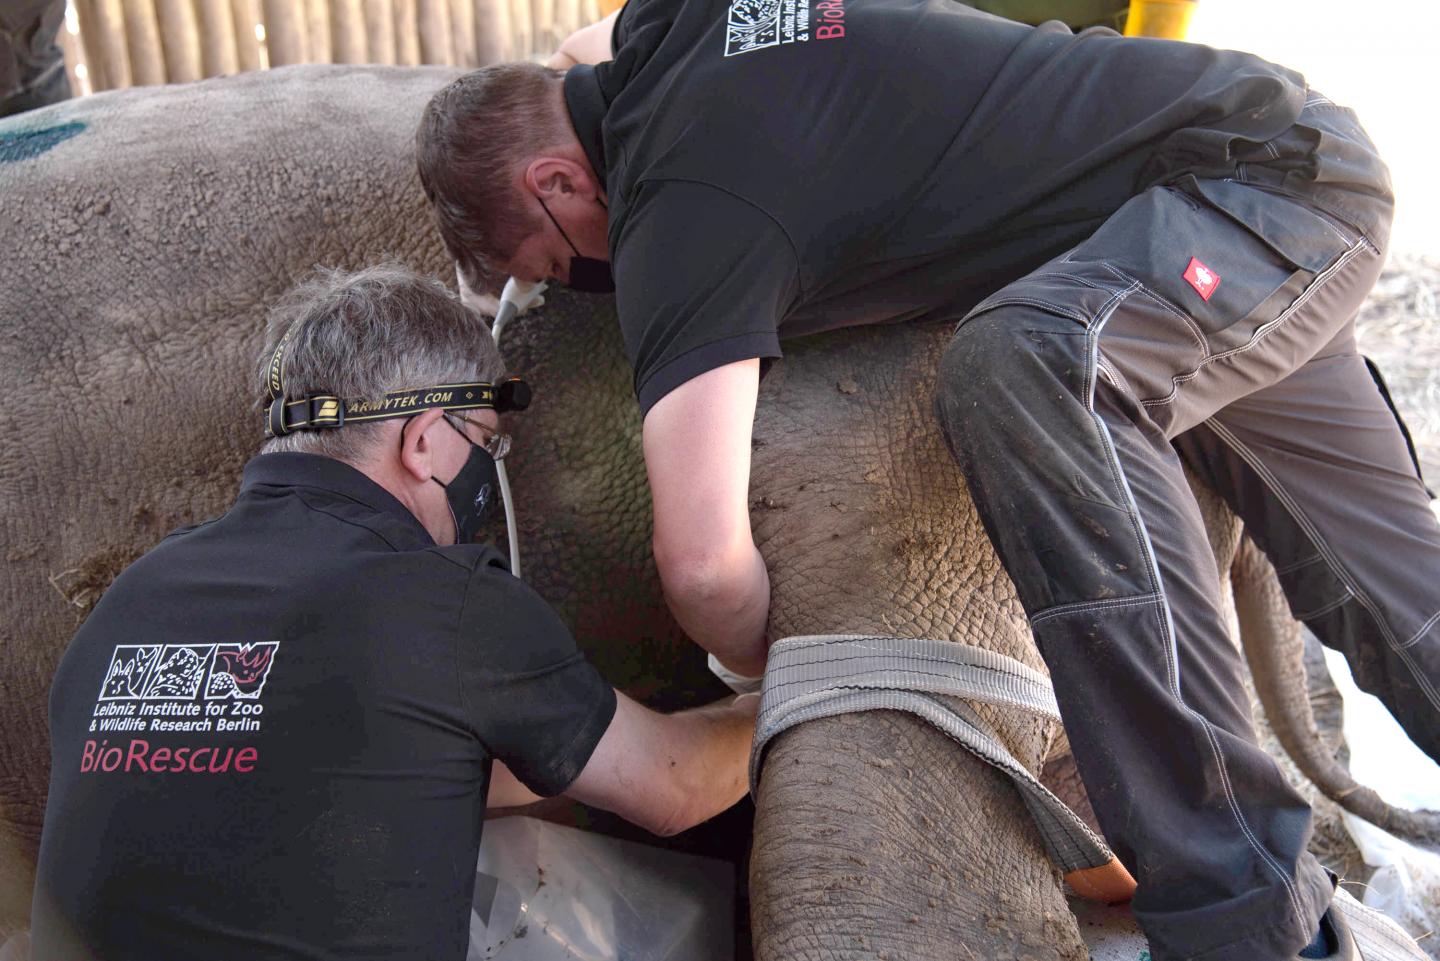 Rescue research on the Northern White Rhino in Kenya, conducted by the BioRescue-Team.